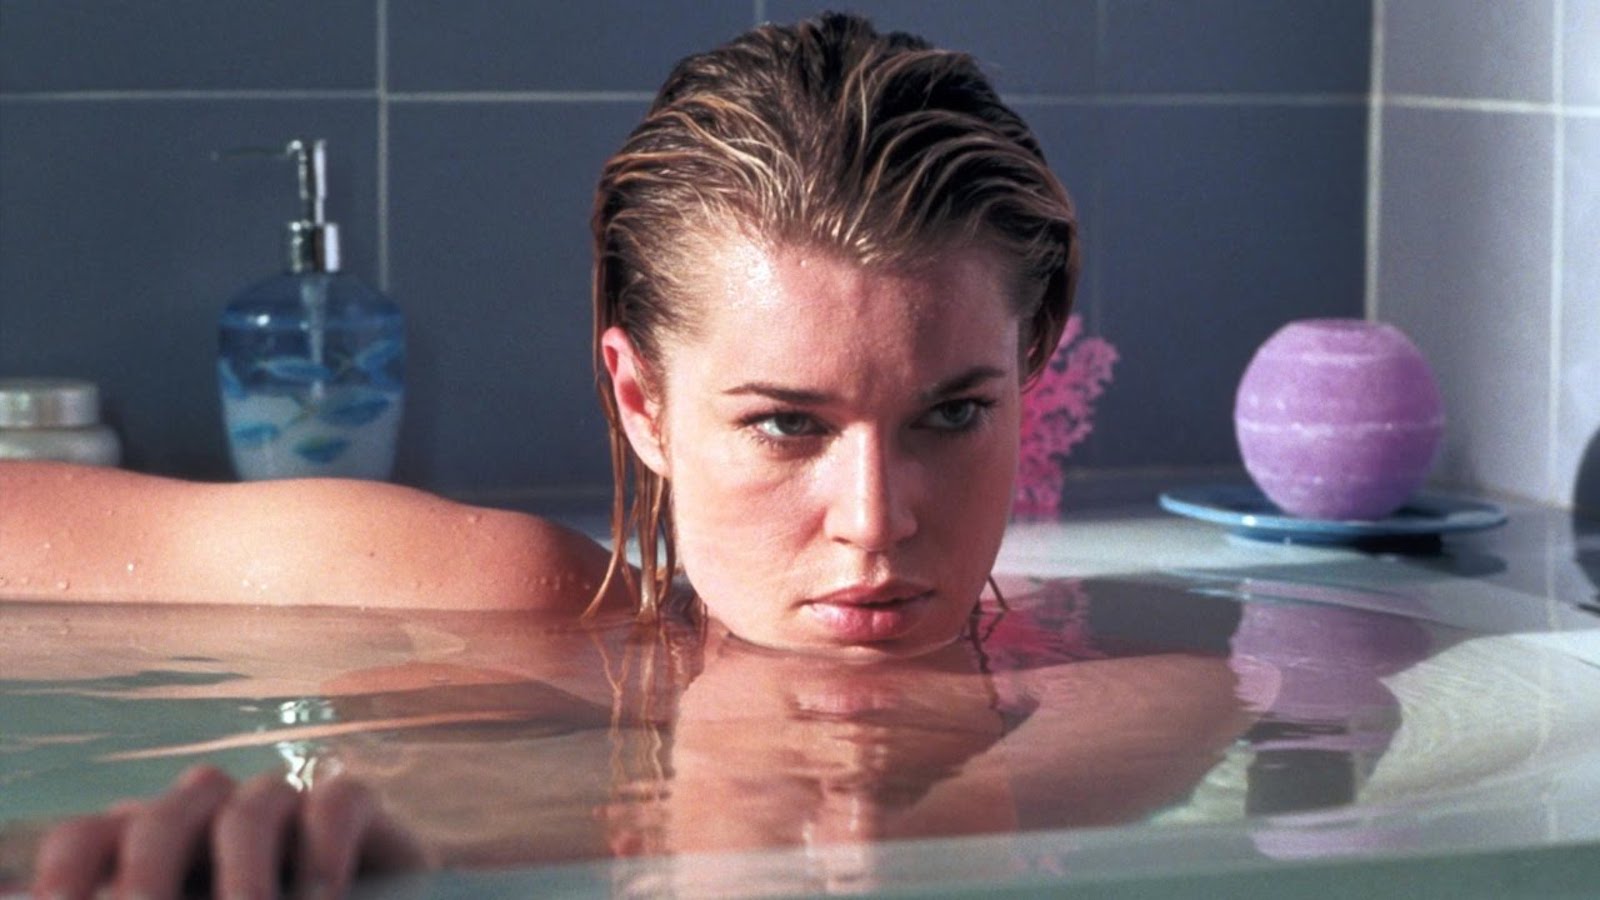 A woman sits in a bathtub, the water nearly overflowing as she looks off screen